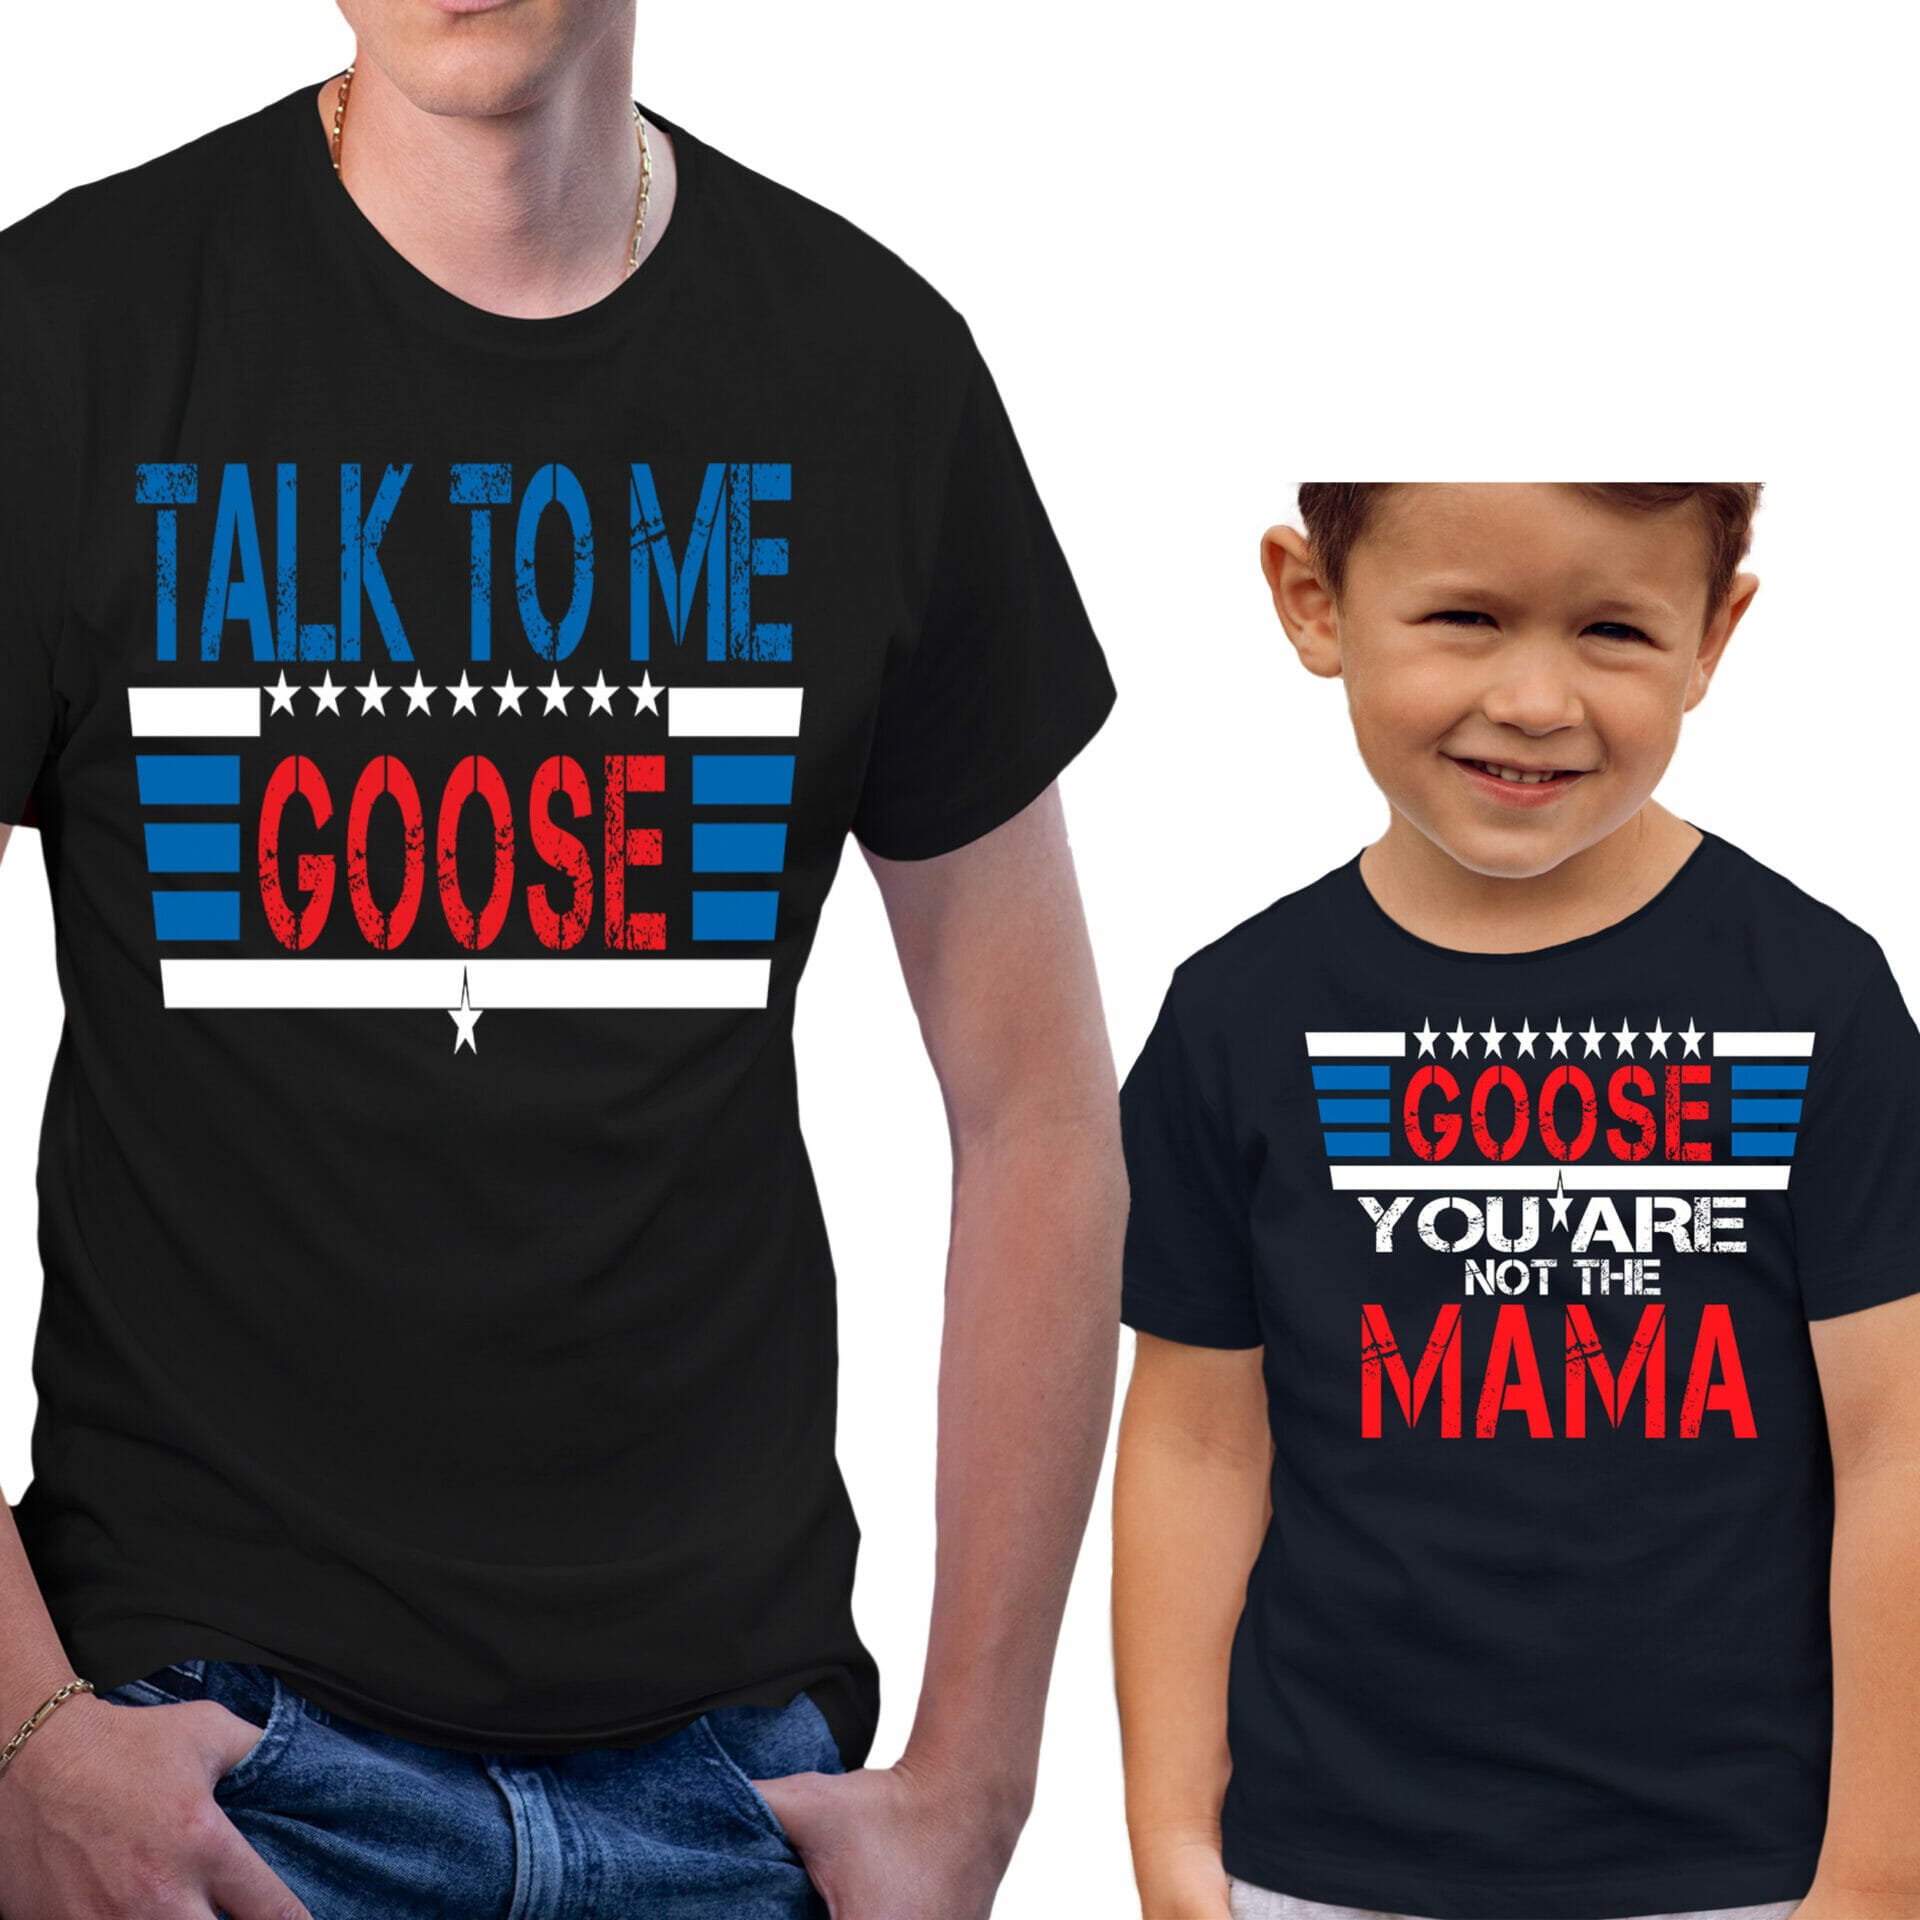 Talk to me goose - You are not the mama - funny father and son tshirt design bundle